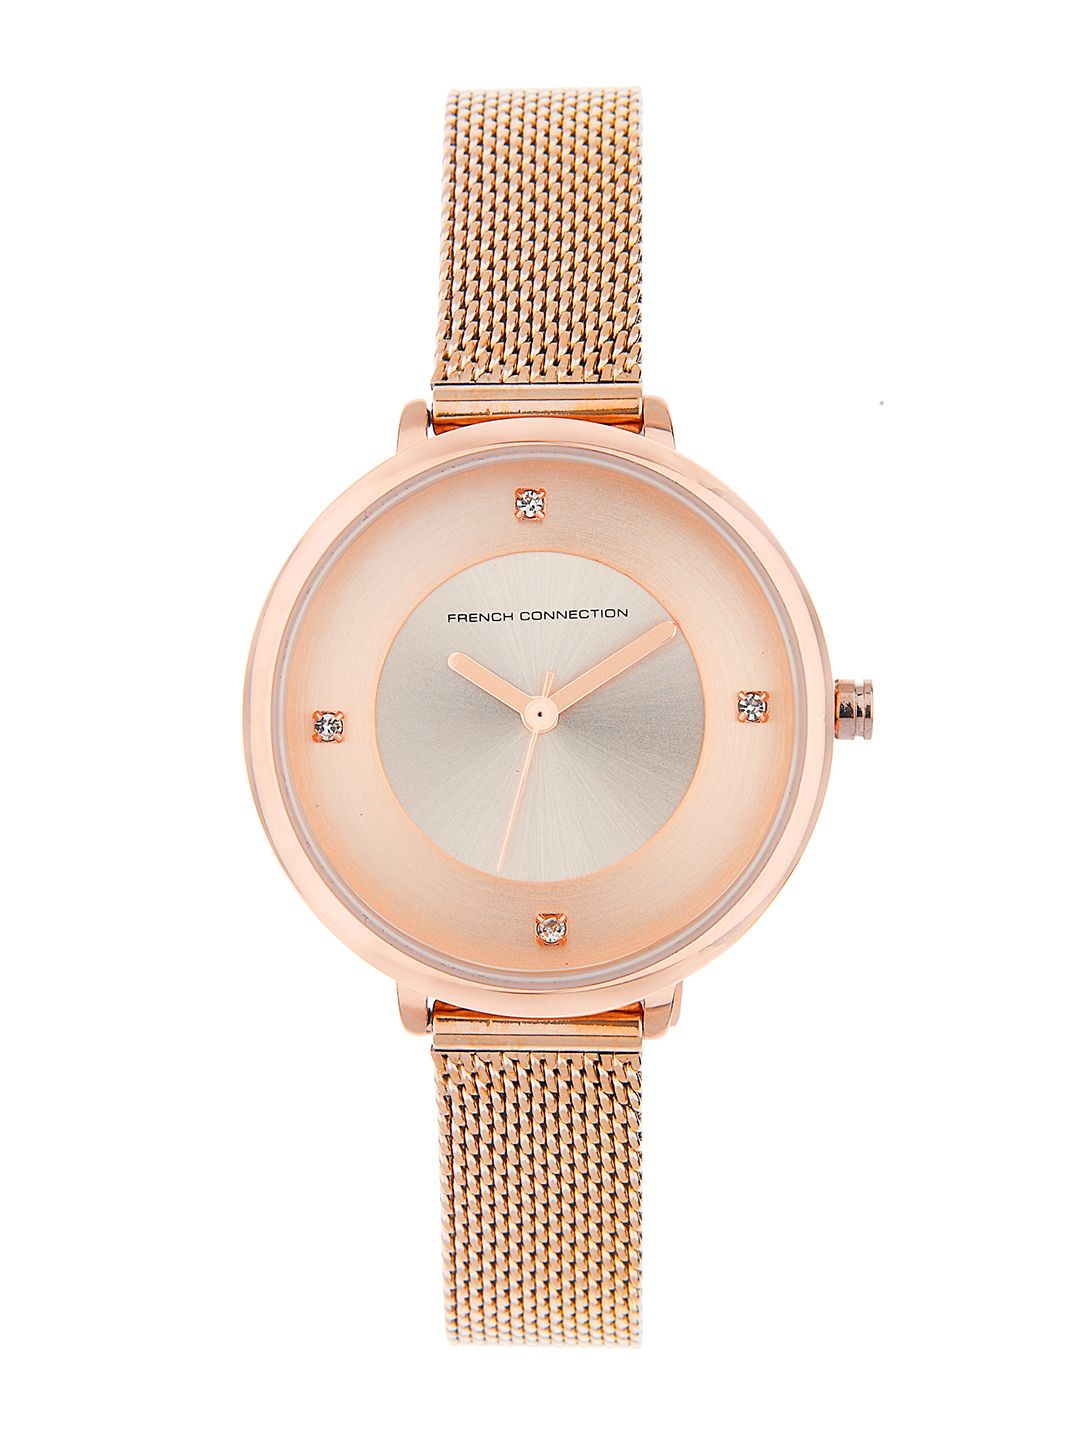 French Connection Women Rose Gold Analogue Watch FCN0007C Price in India